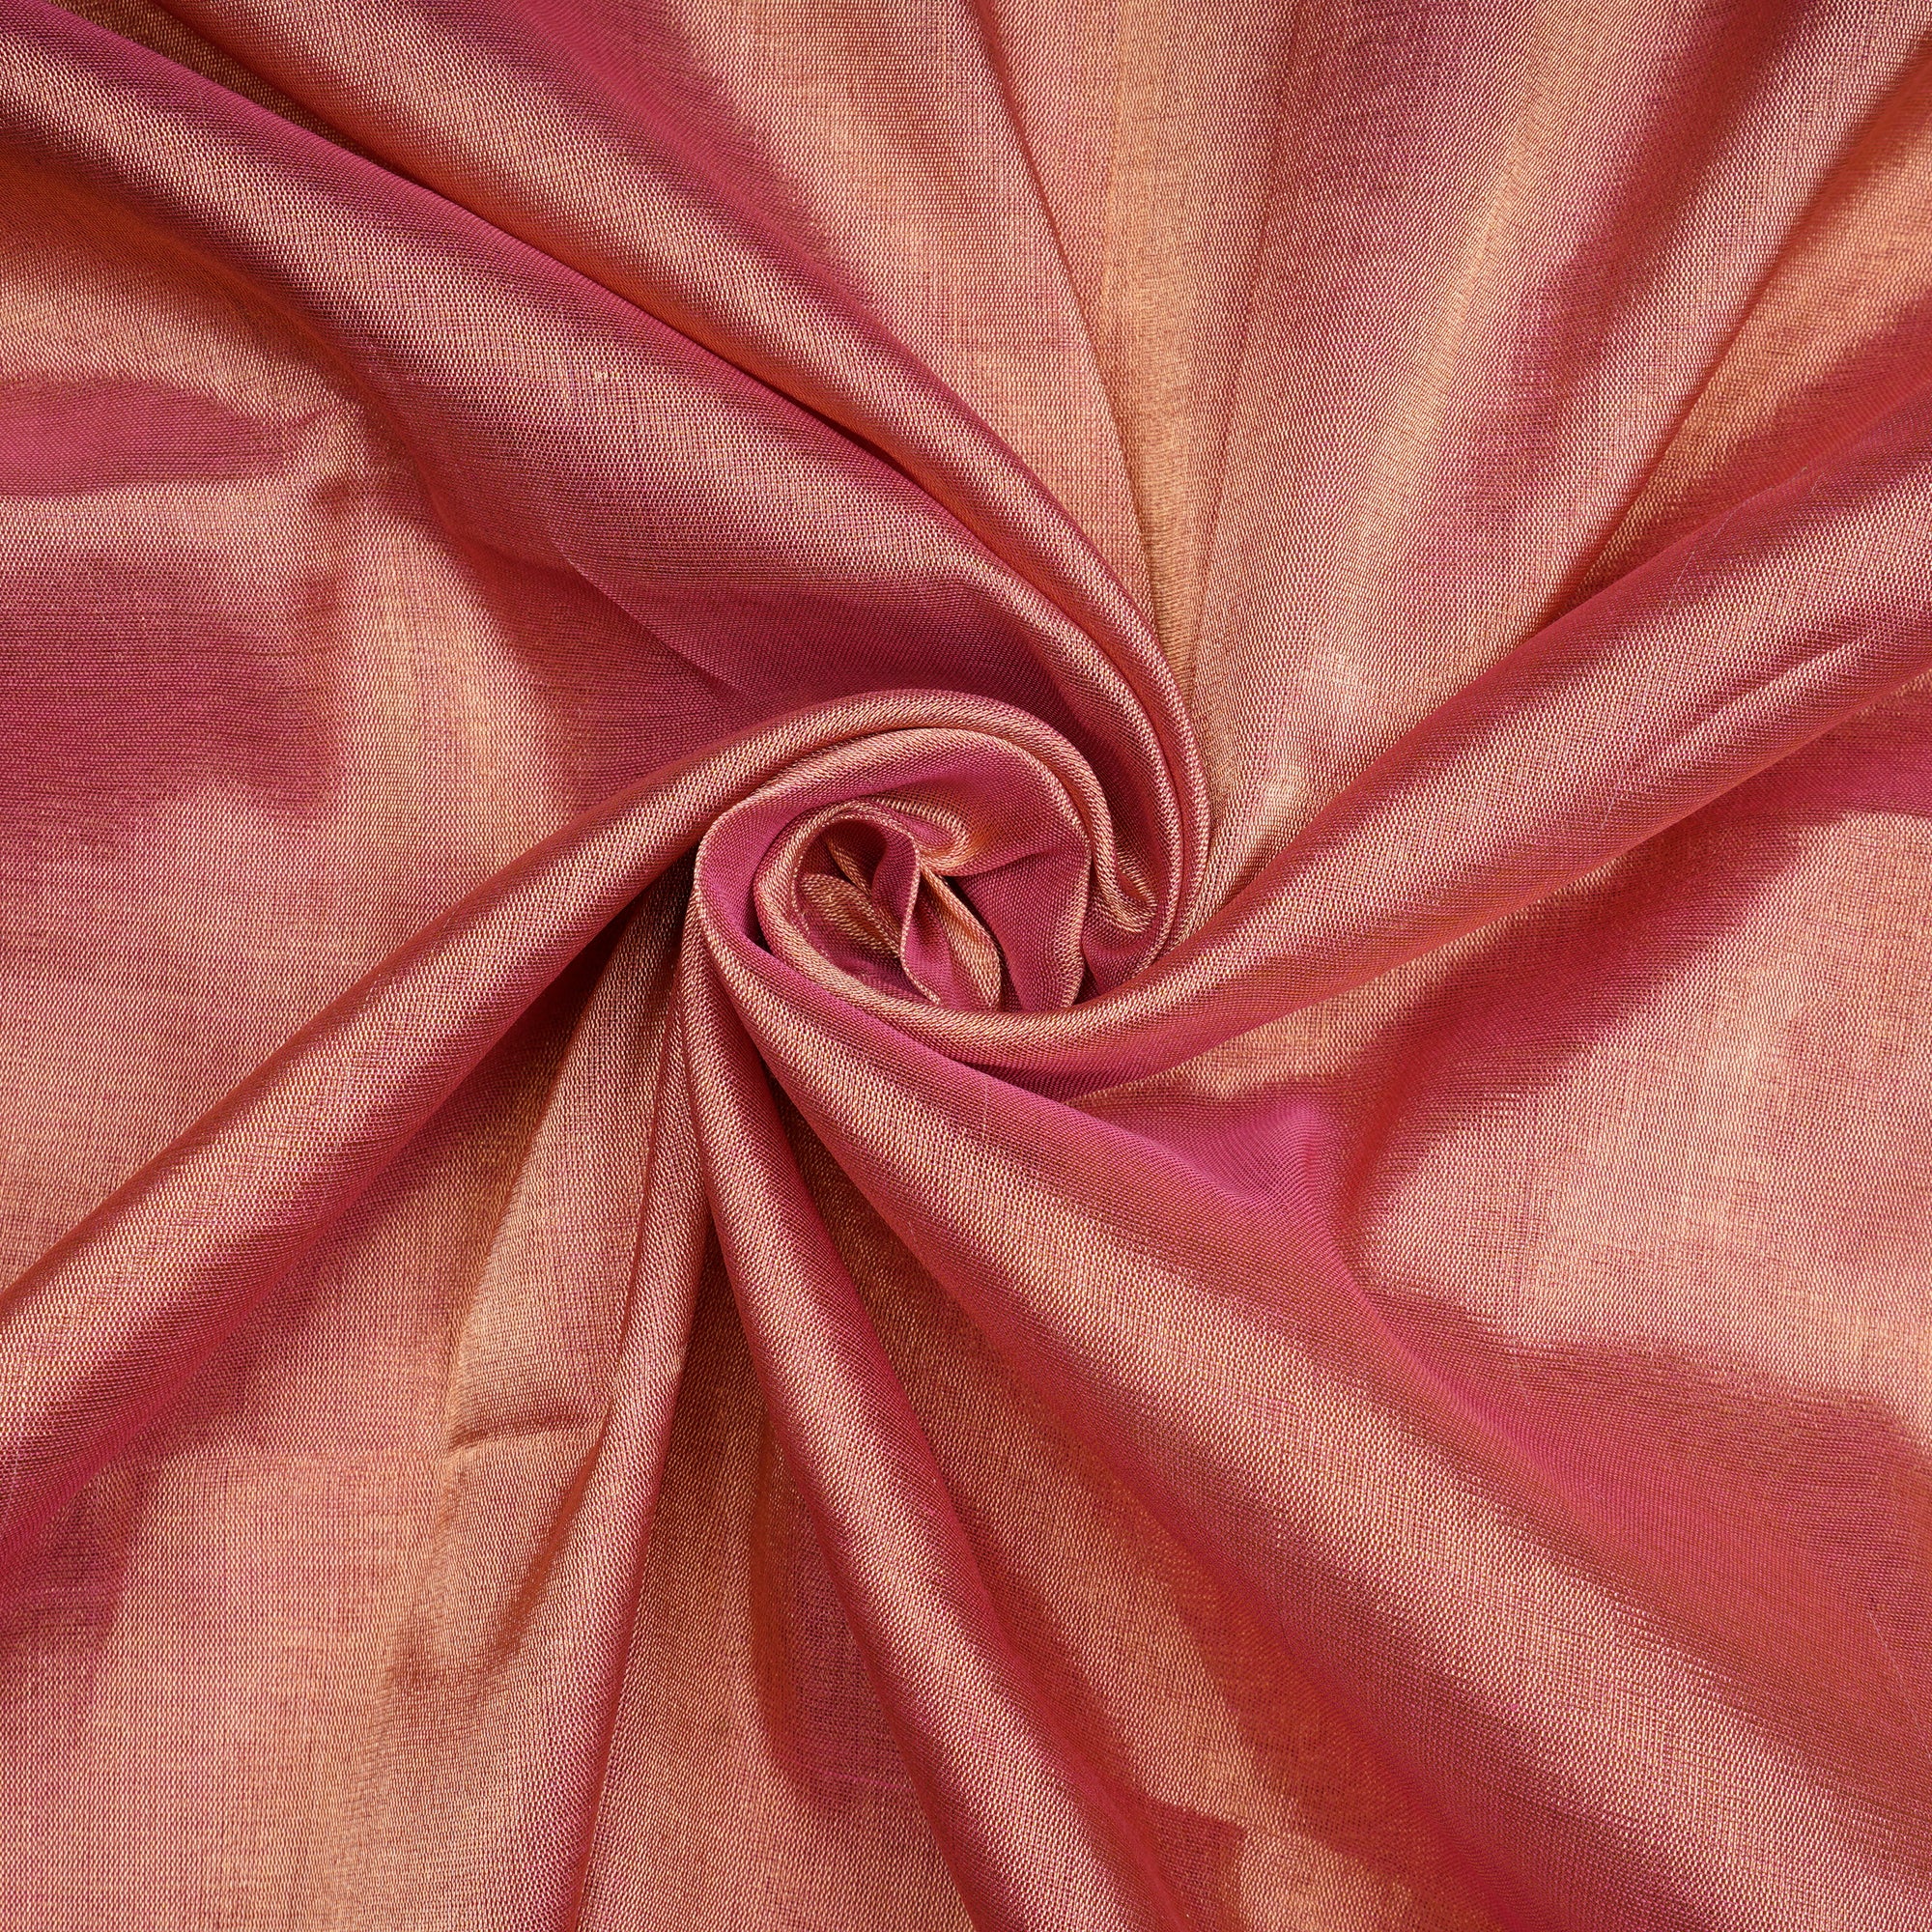 Pink-Golden Handwoven Heavy Pure Tissue Fabric